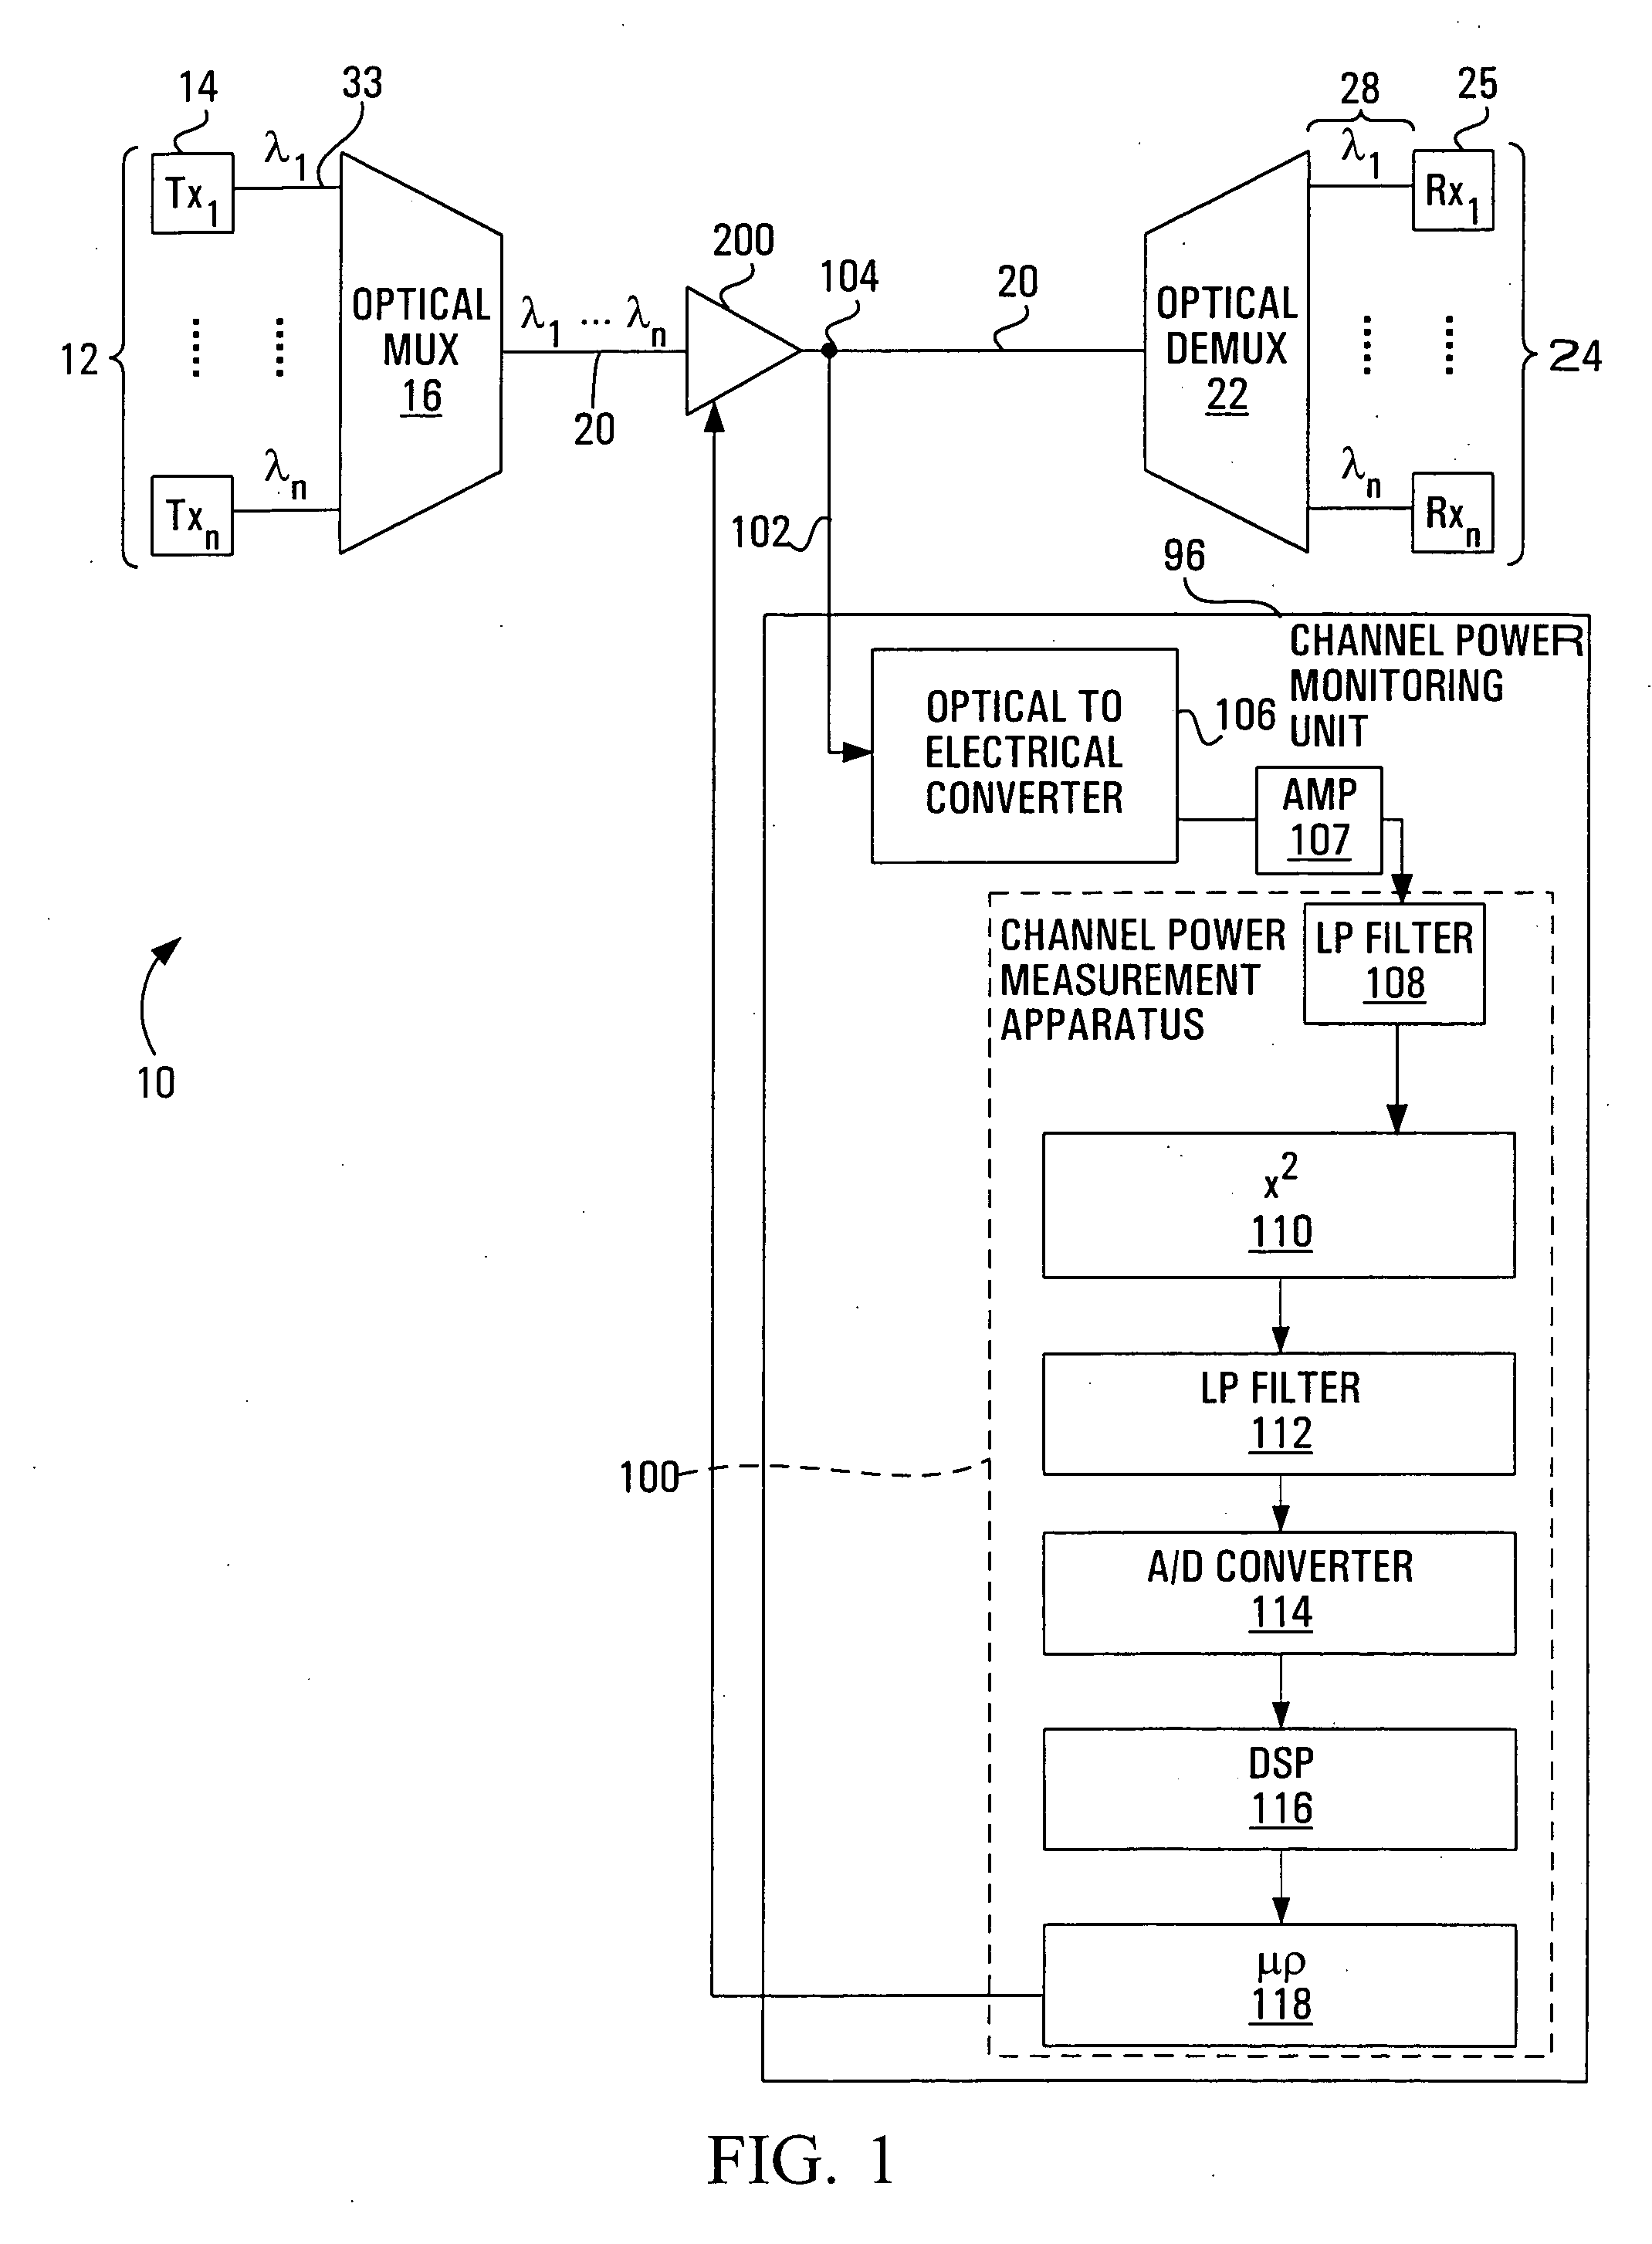 Method and apparatus for encoding optical power and non-payload data in an optical signal